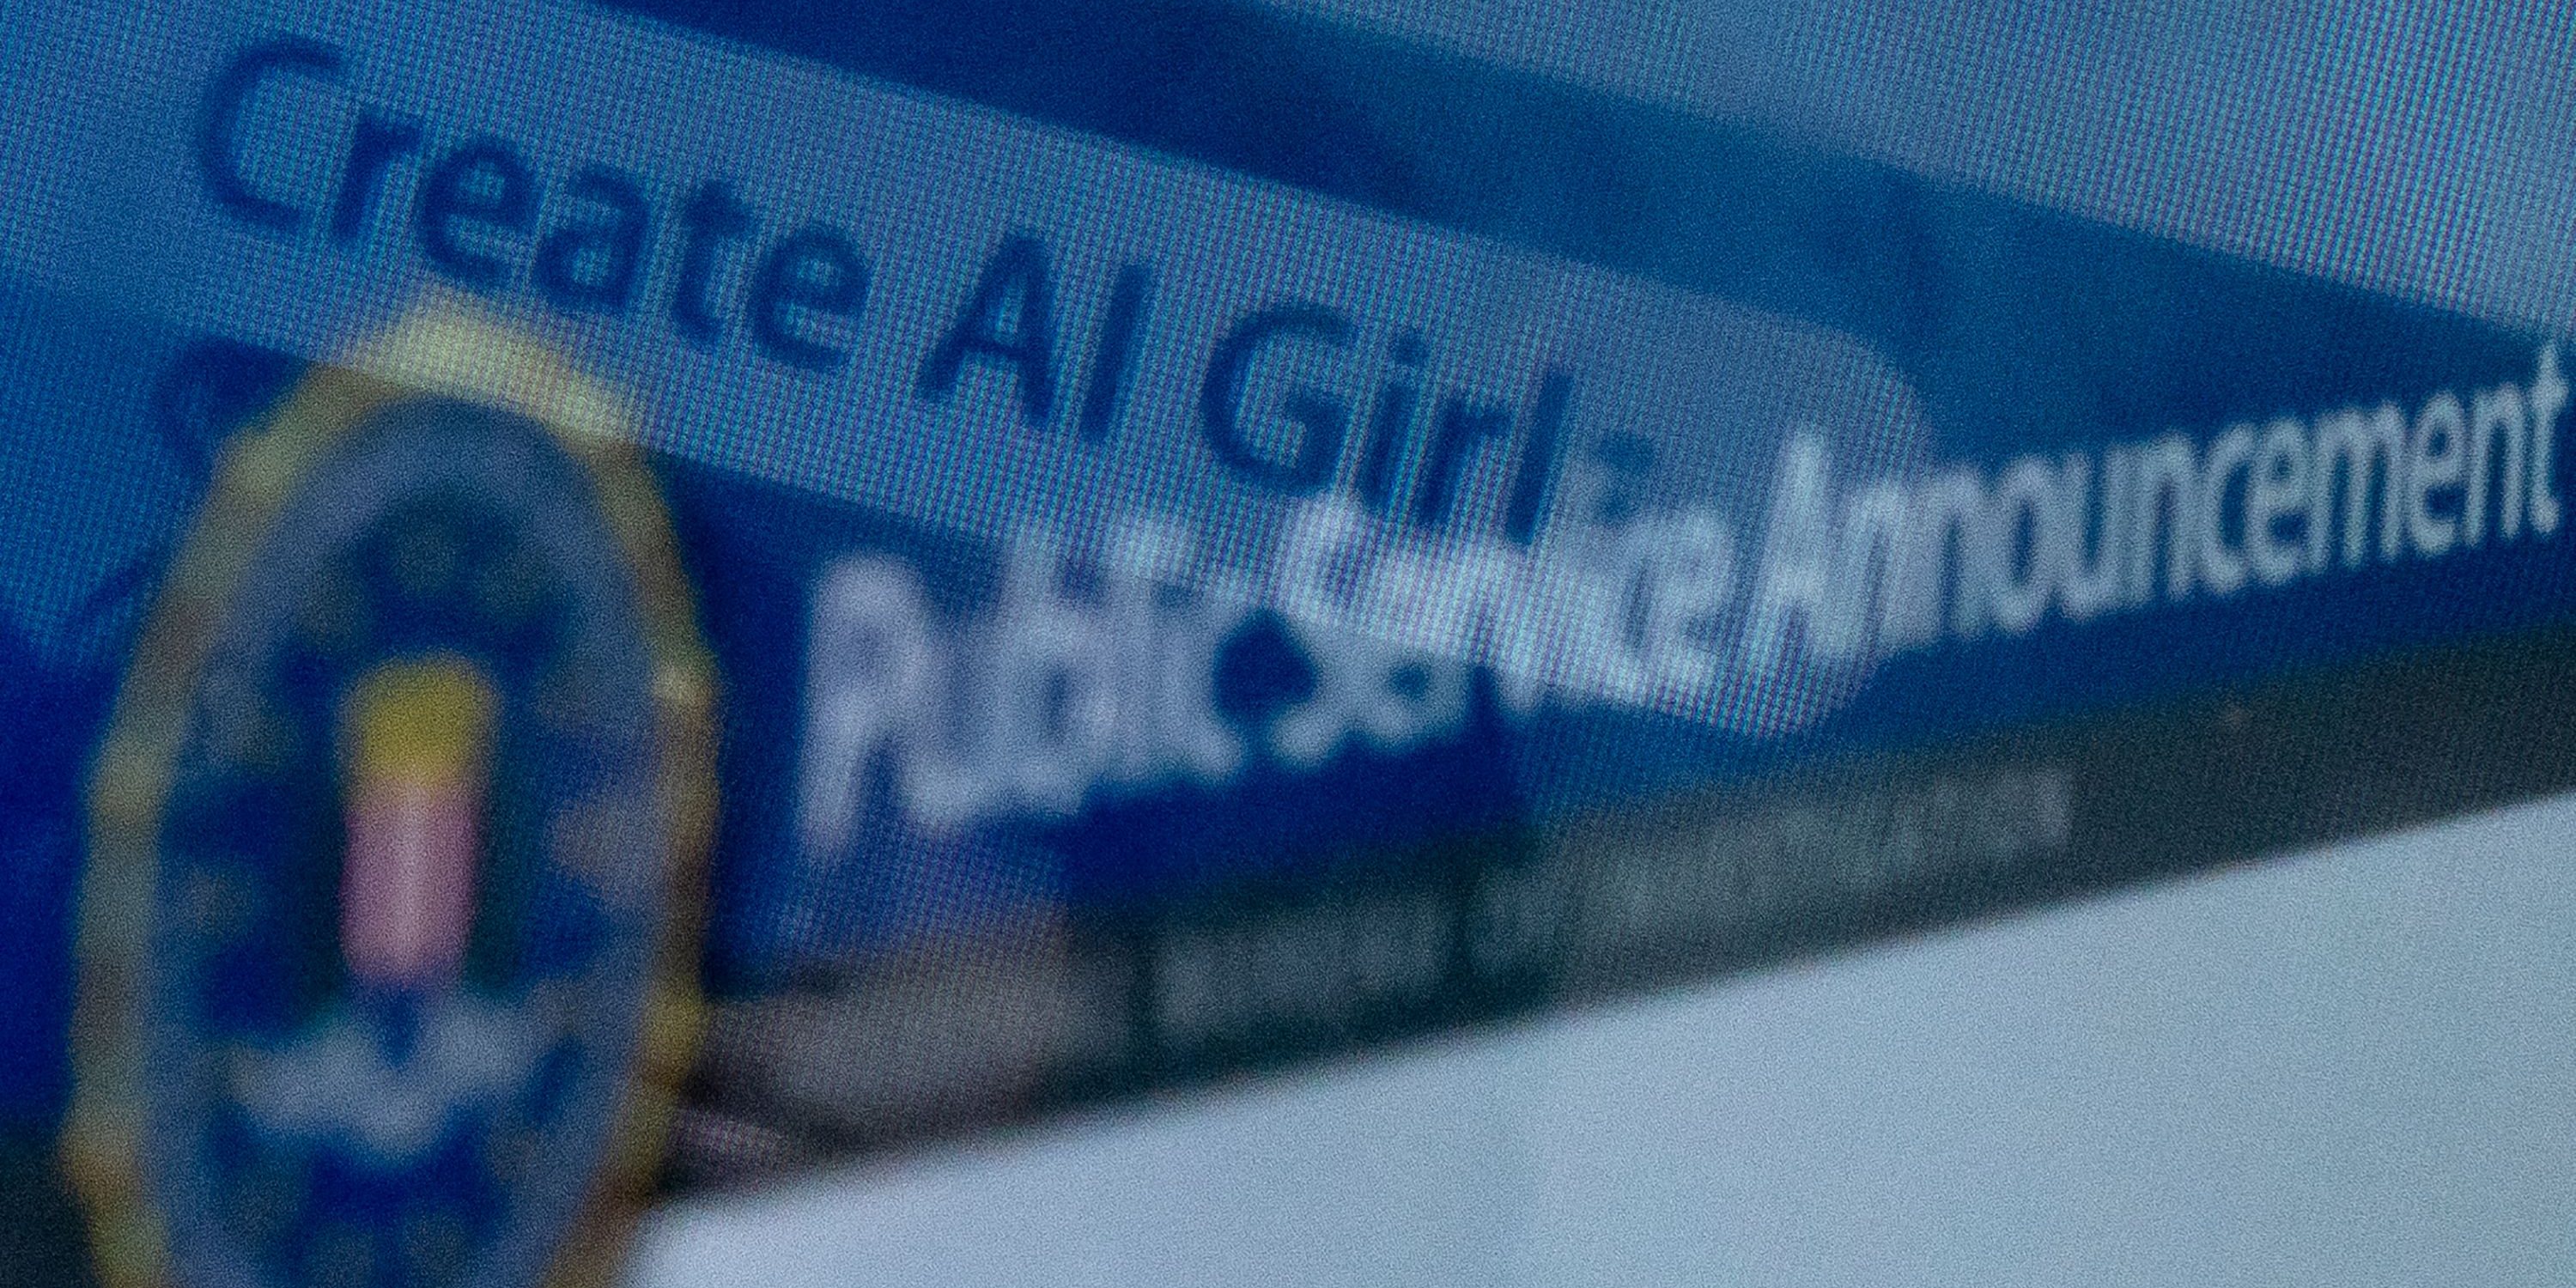 This photo illustration created on July 18, 2023, in Washington, DC, shows an advertisement to create AI girls reflected in a public service announcement issued by the FBI regarding malicious actors manipulating photos and videos to create explicit content and sextortion schemes. Photo apps digitally undressing women, sexualized text-to-image prompts creating &quot;AI girls&quot; and manipulated images fuelling &quot;sextortion&quot; rackets -- a boom in deepfake porn is outpacing US and European efforts to regulate the technology. (Photo by Stefani REYNOLDS / AFP) (Photo by STEFANI REYNOLDS/AFP via Getty Images)